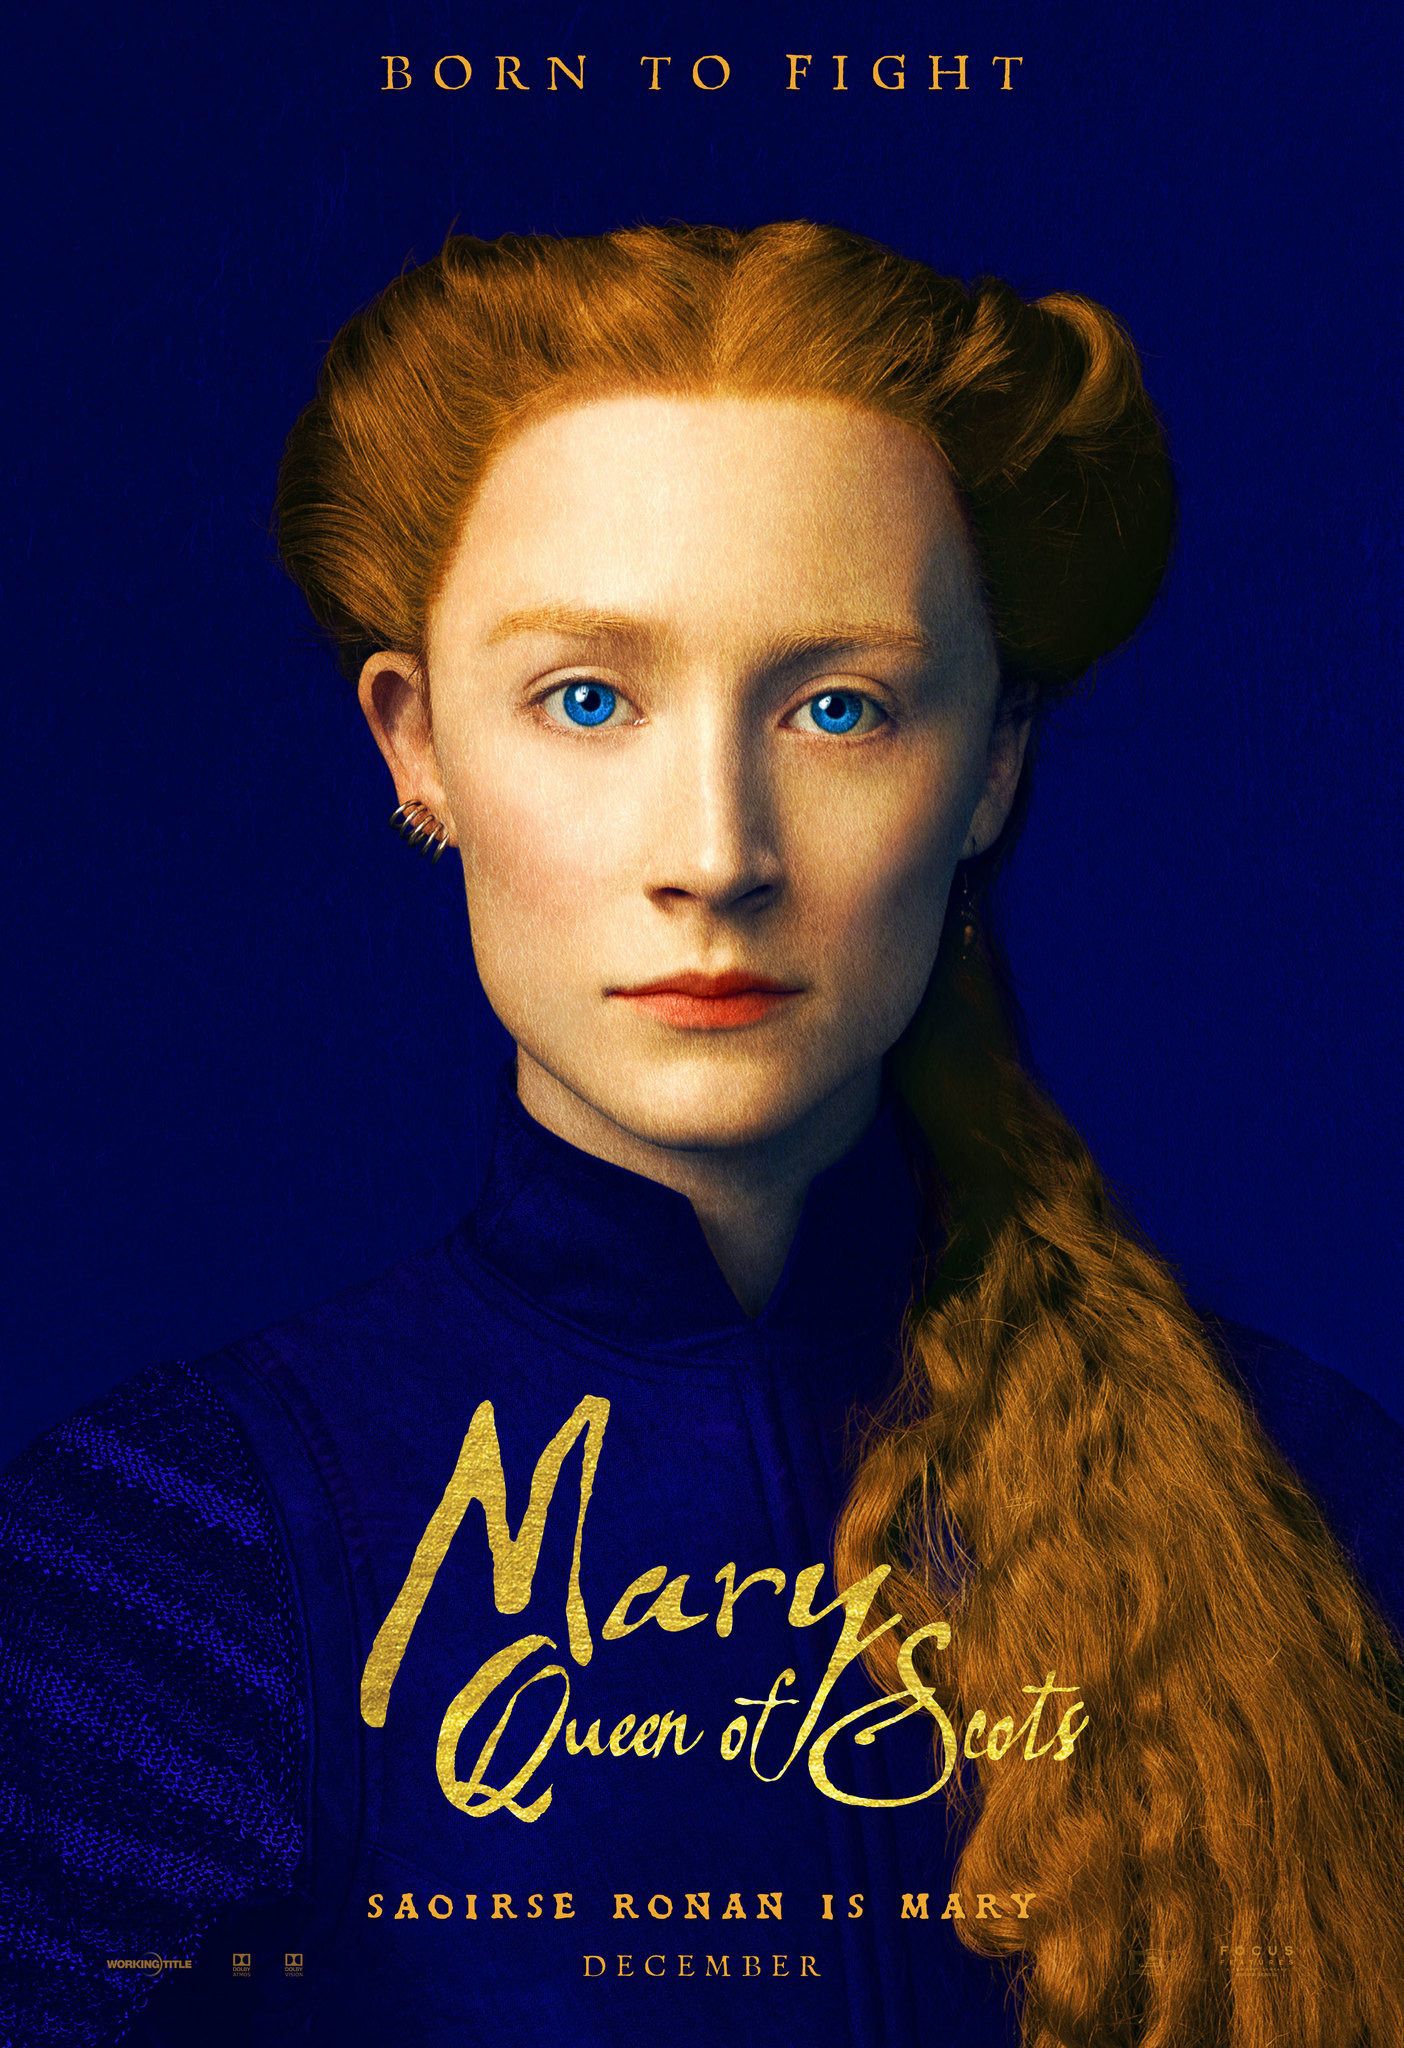 Mary Queen of Scots Margot Robbie Poster